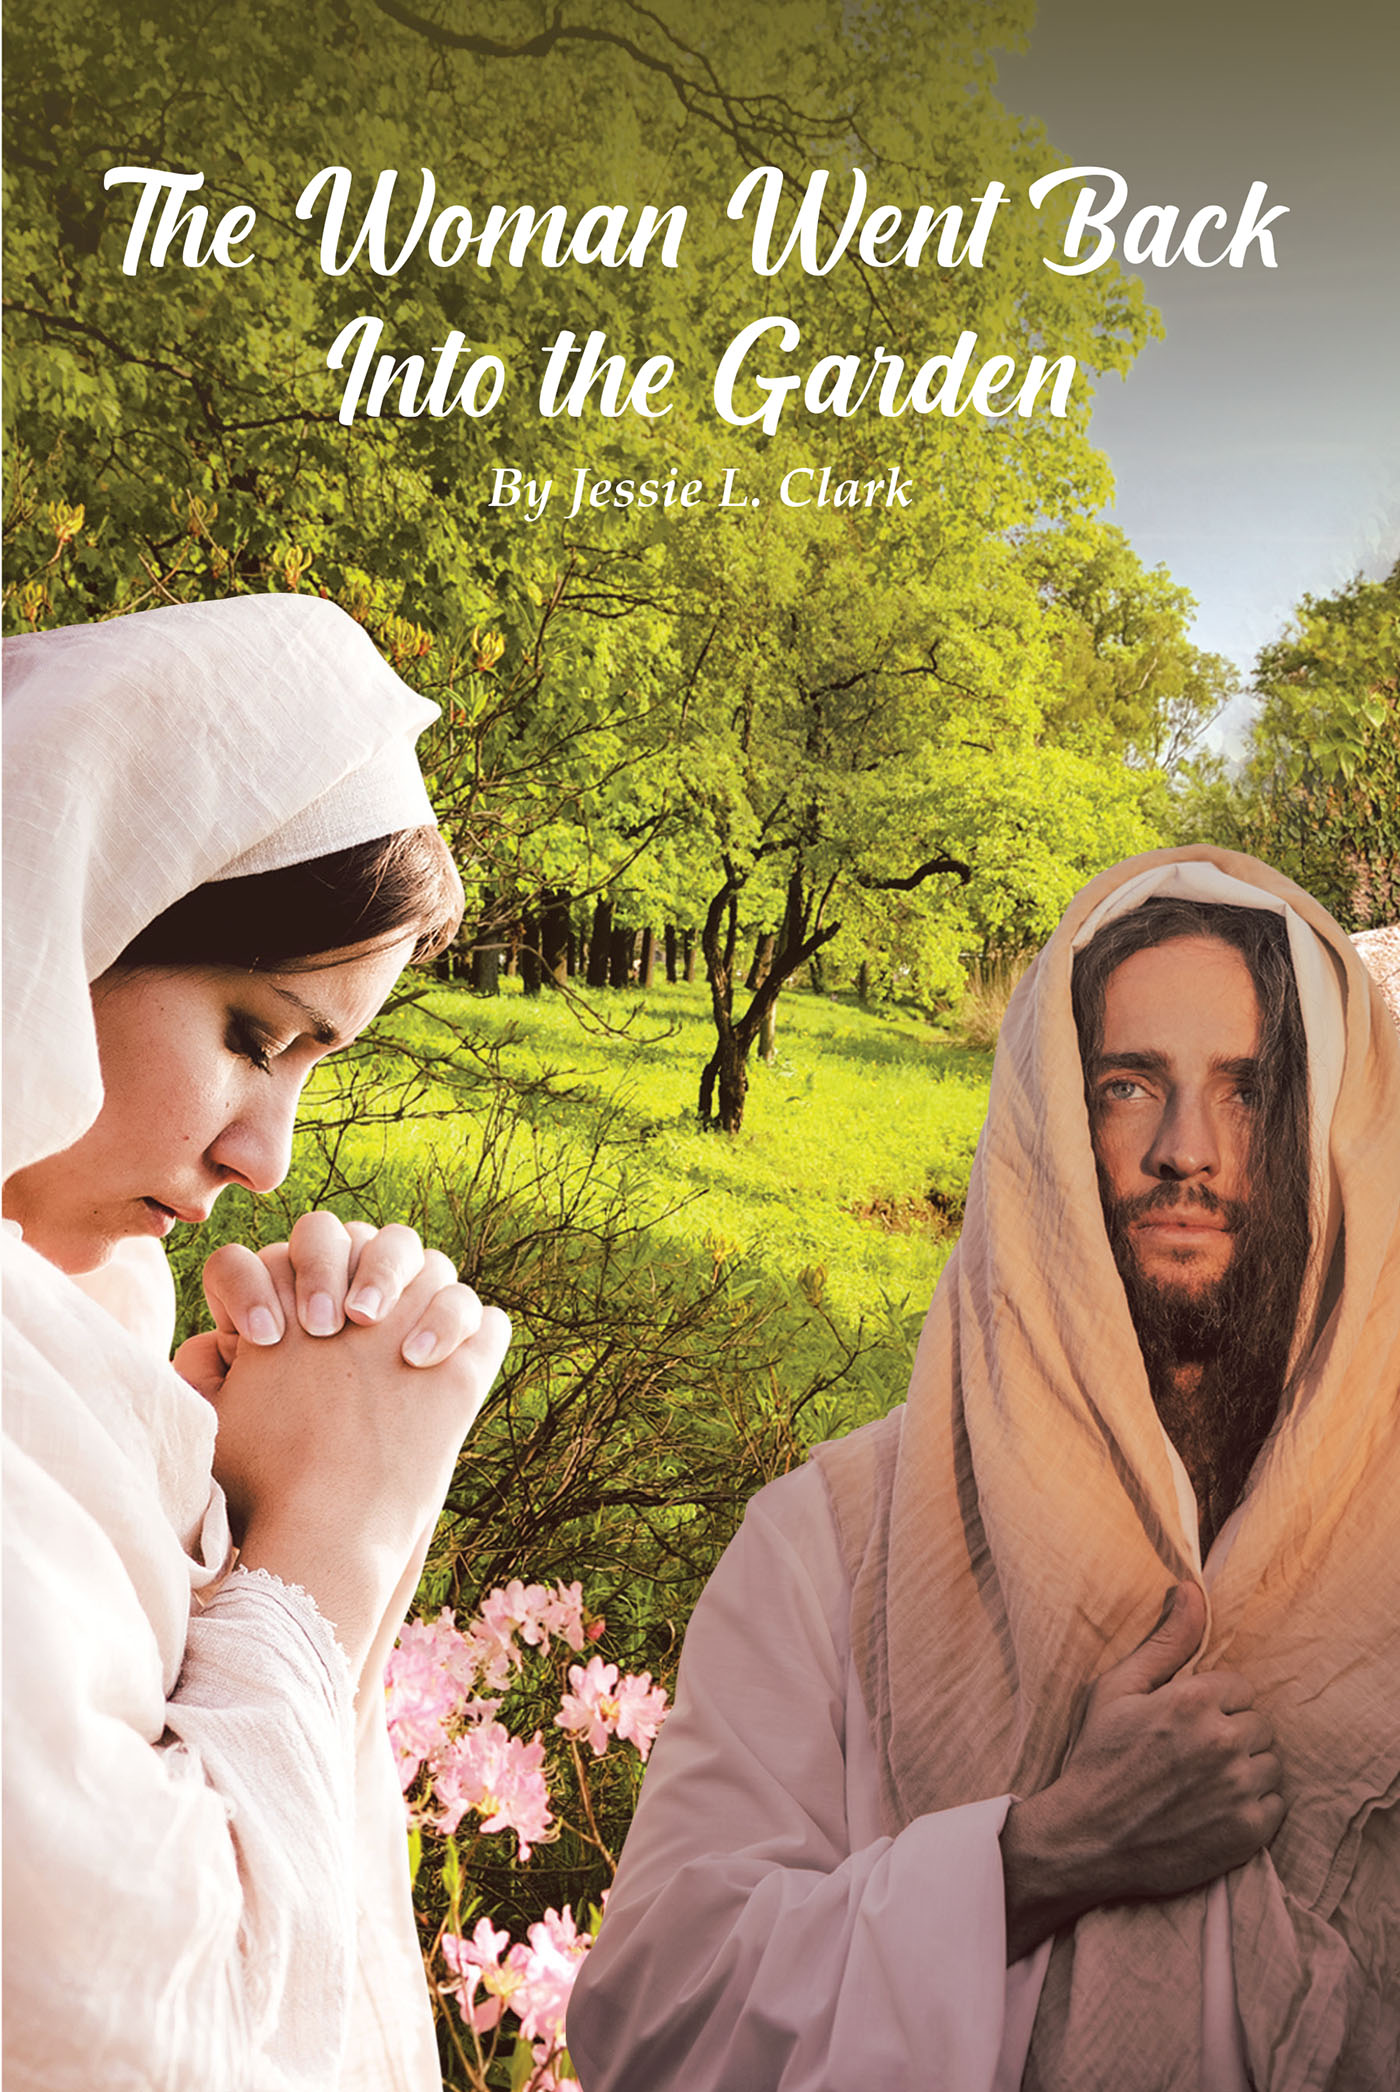 Jessie L. Clark’s Newly Released “The Woman Went Back Into the Garden” is a Thoughtful Reflection of the Role Women Play Within the World and God’s Plan